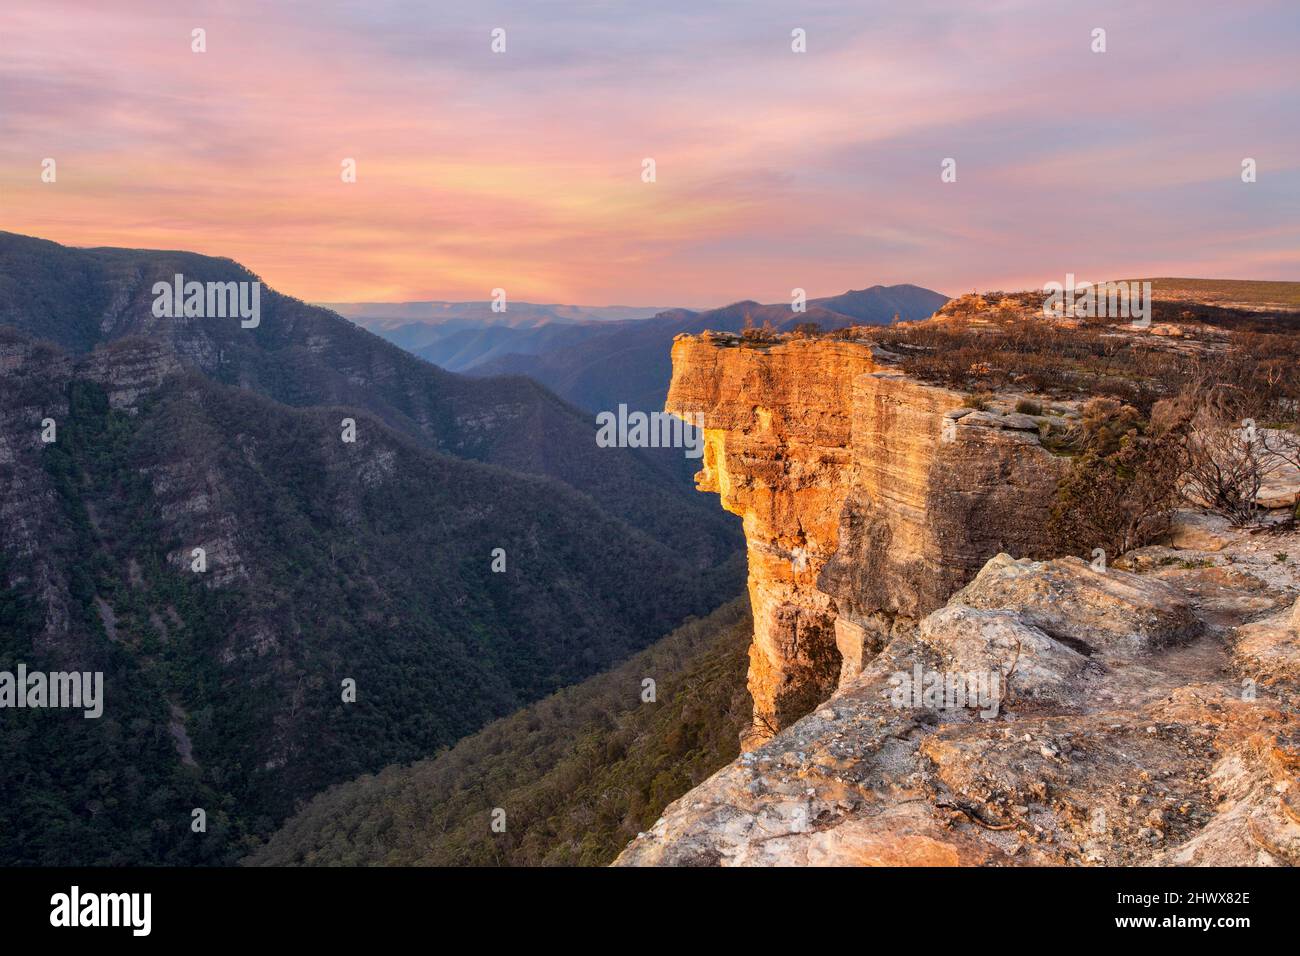 Magnificent cliff escarpment and deep valley views with sunset sky Stock Photo